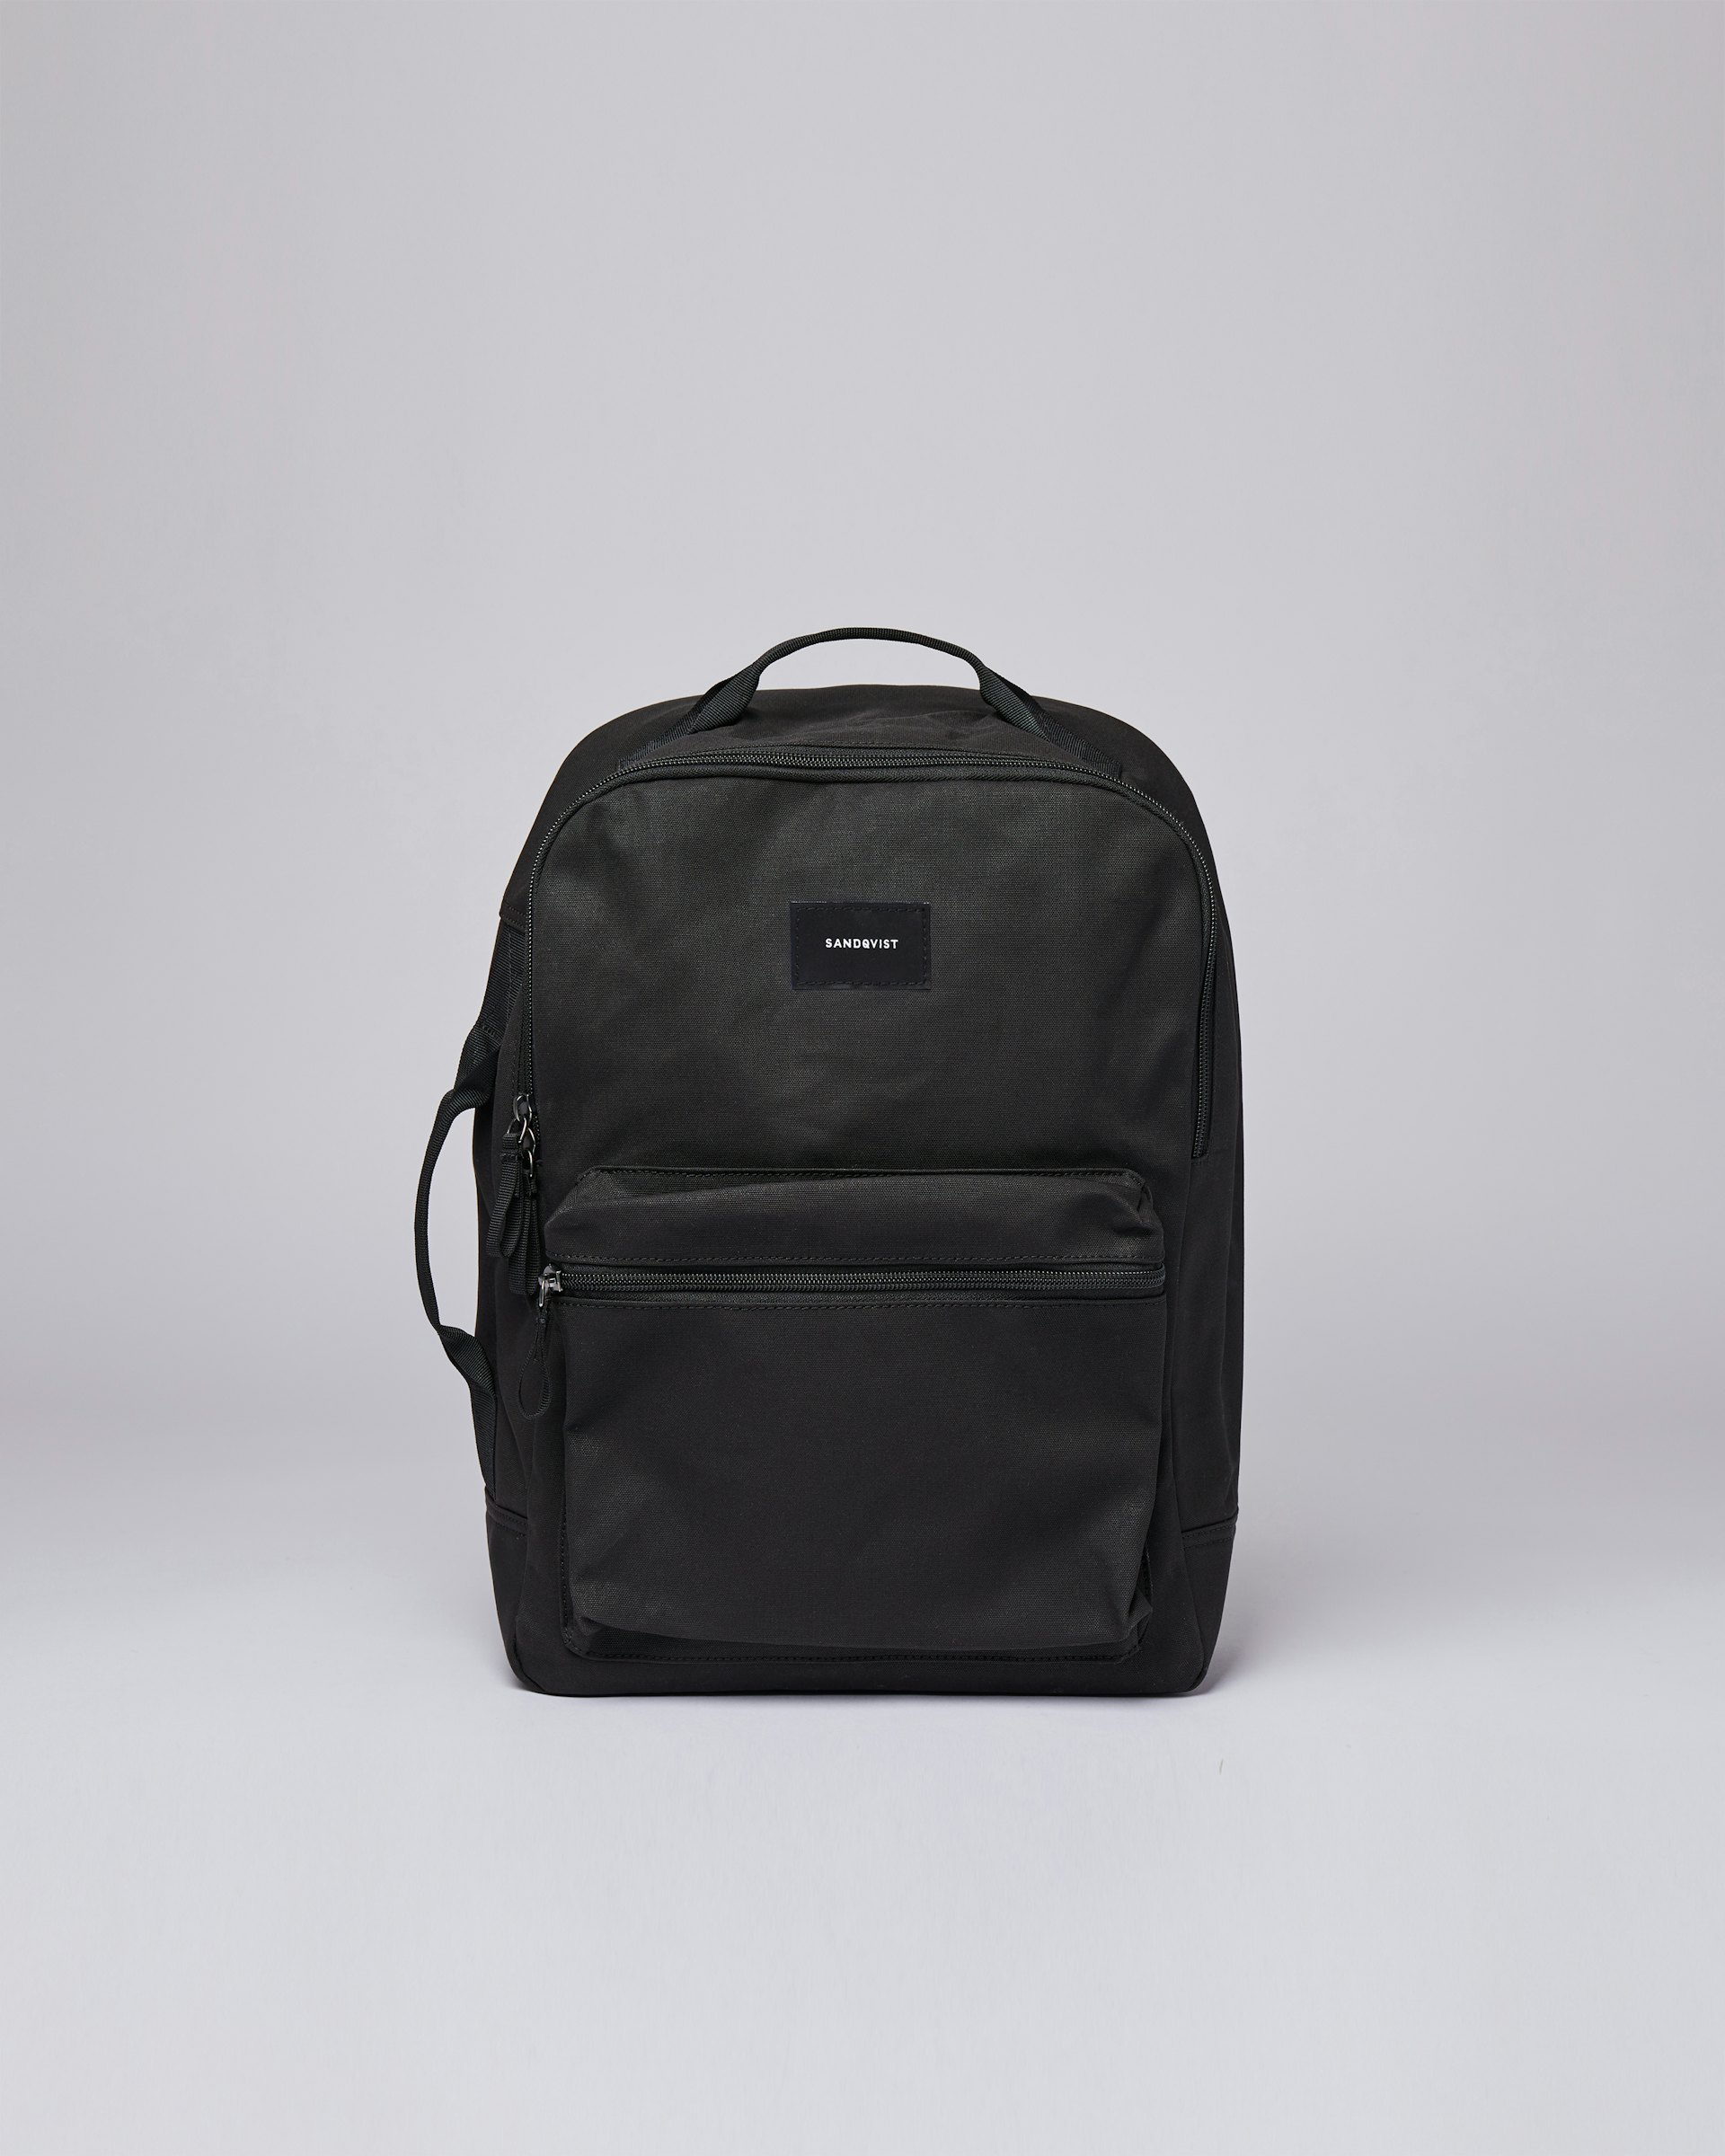 August belongs to the category Backpacks and is in color black